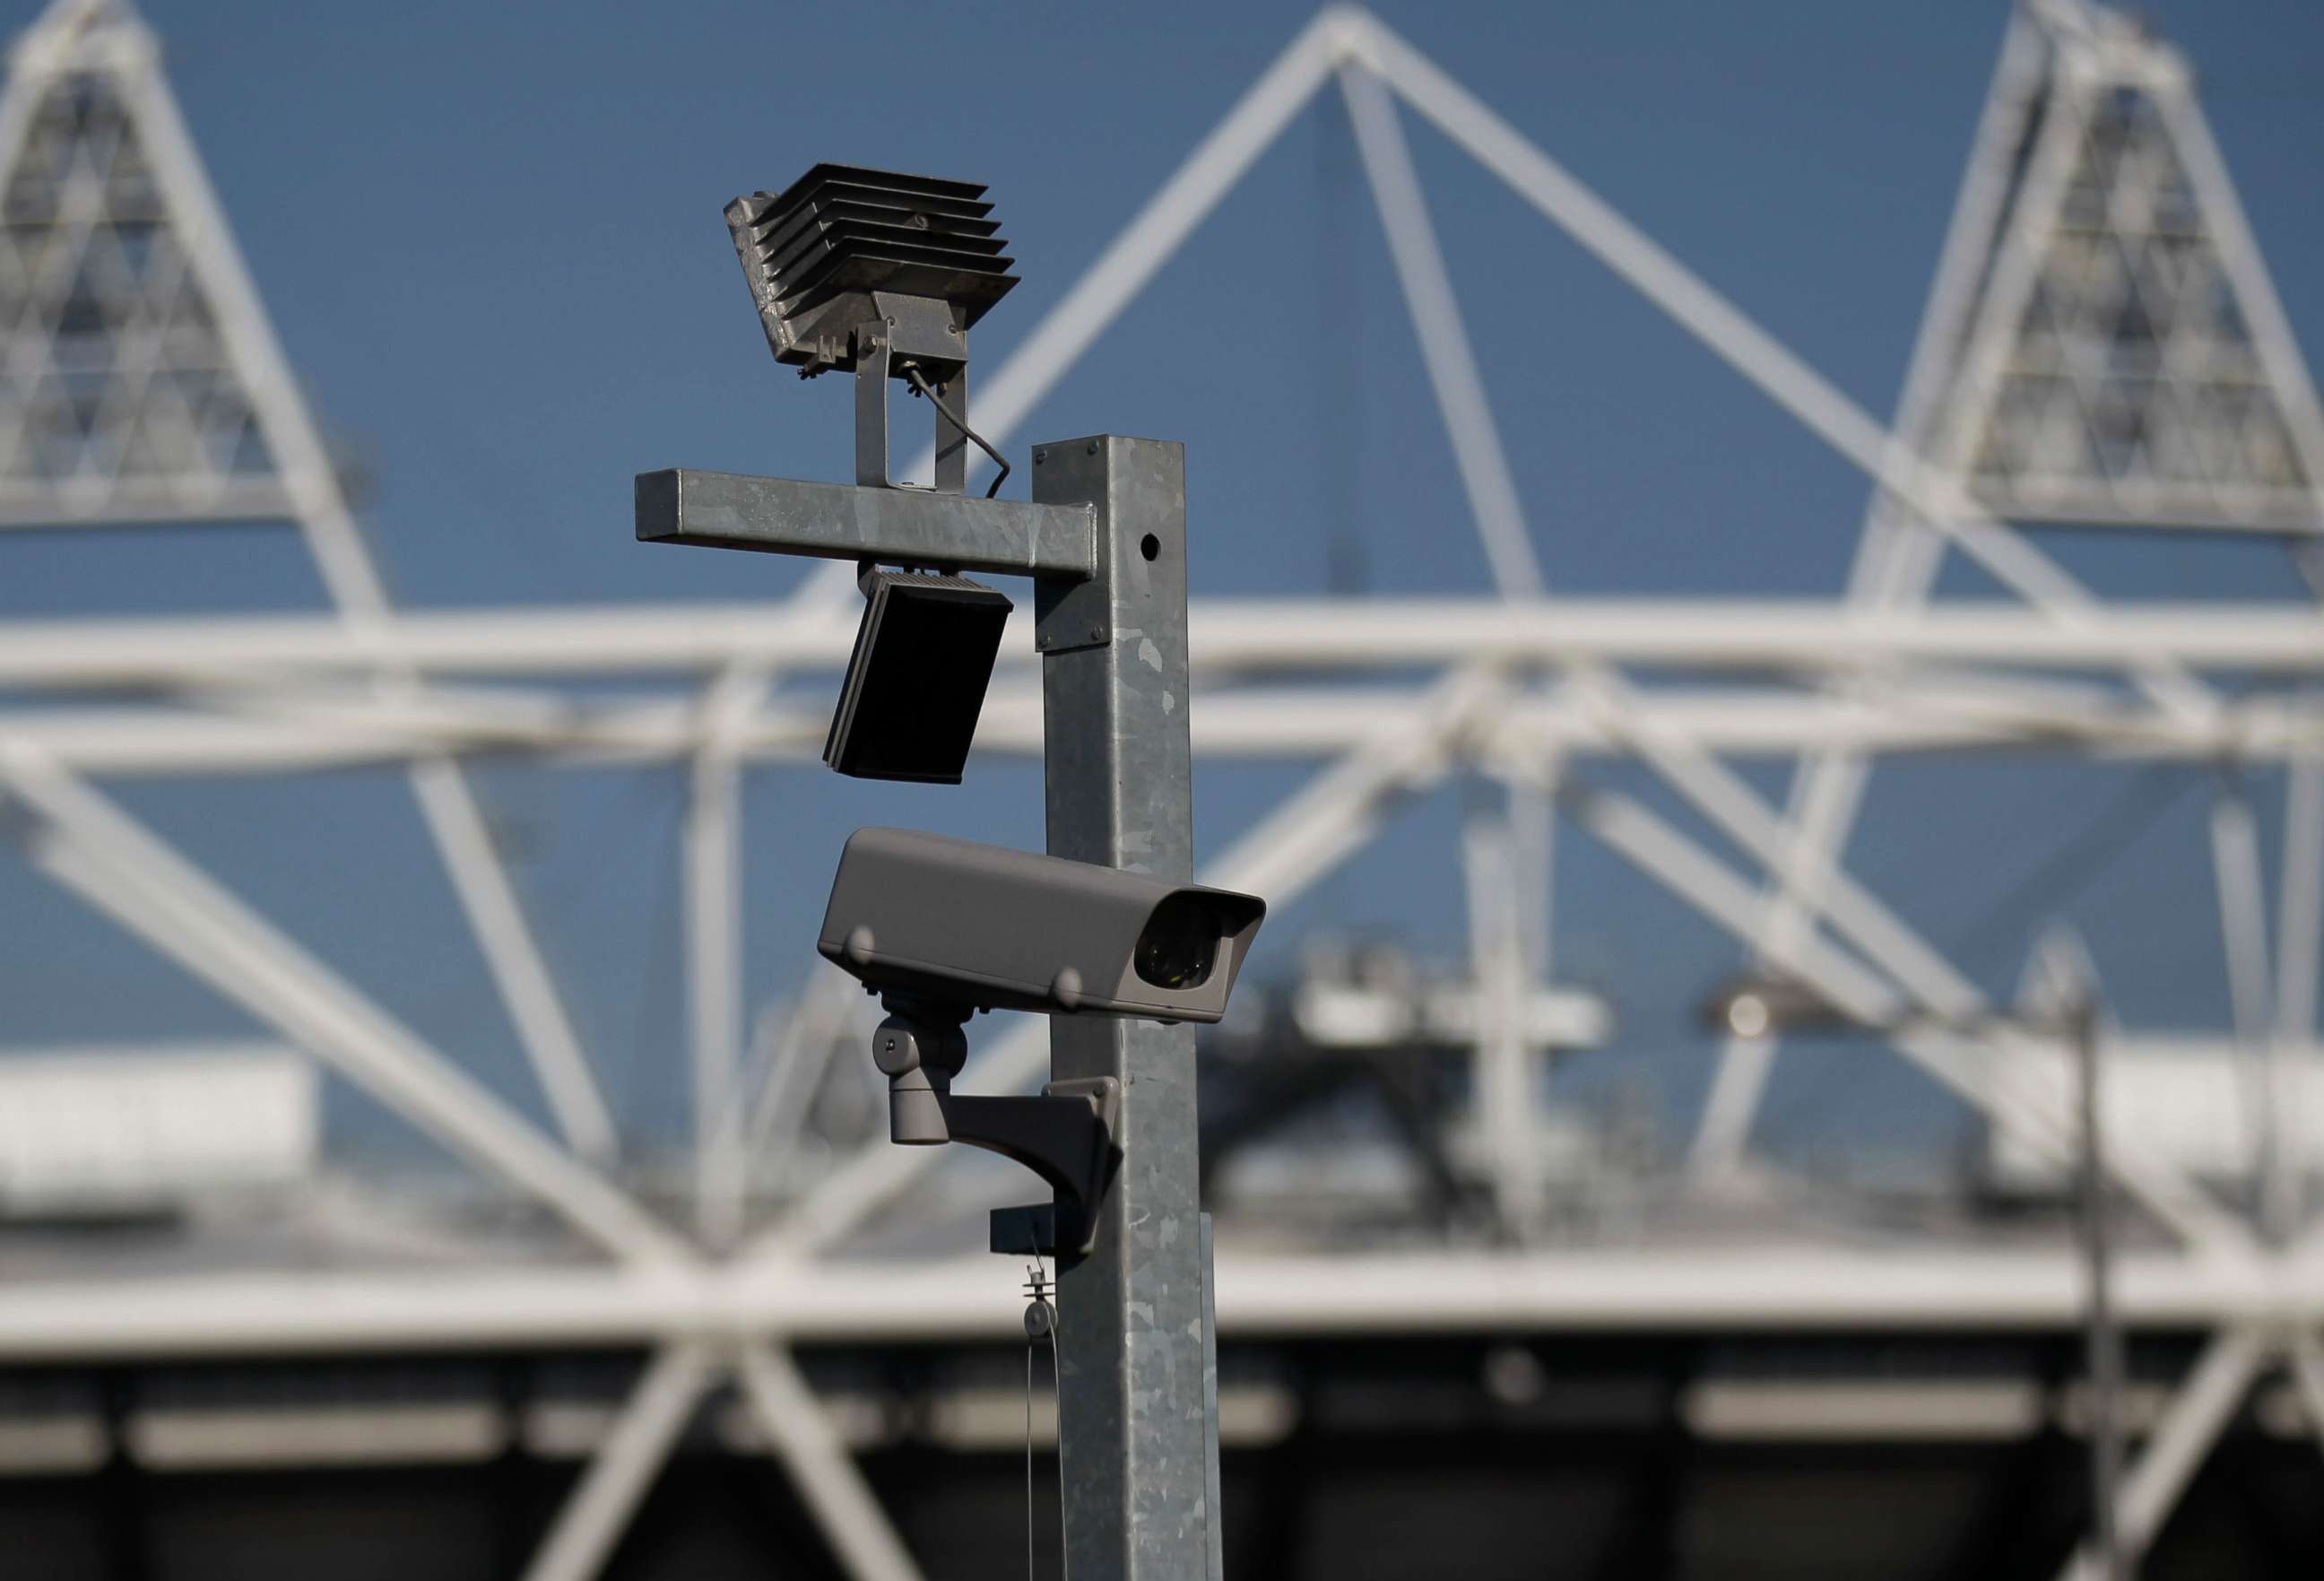 PHOTO: A security cctv camera is seen by the Olympic Stadium at the Olympic Park in London in this March 28, 2012 file photo.